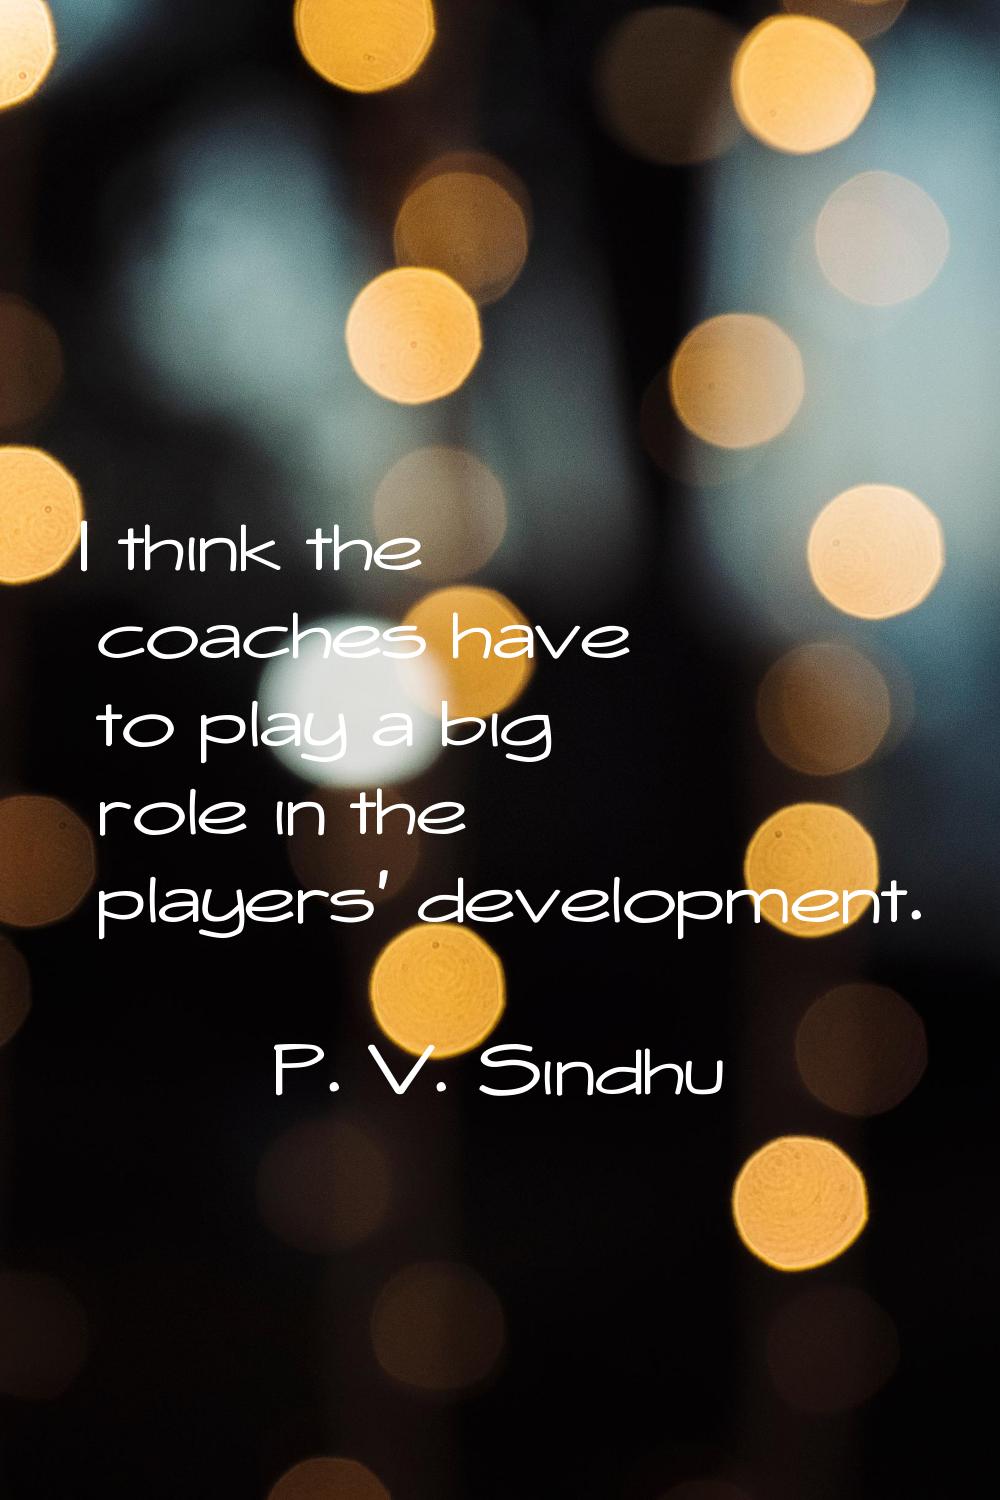 I think the coaches have to play a big role in the players' development.